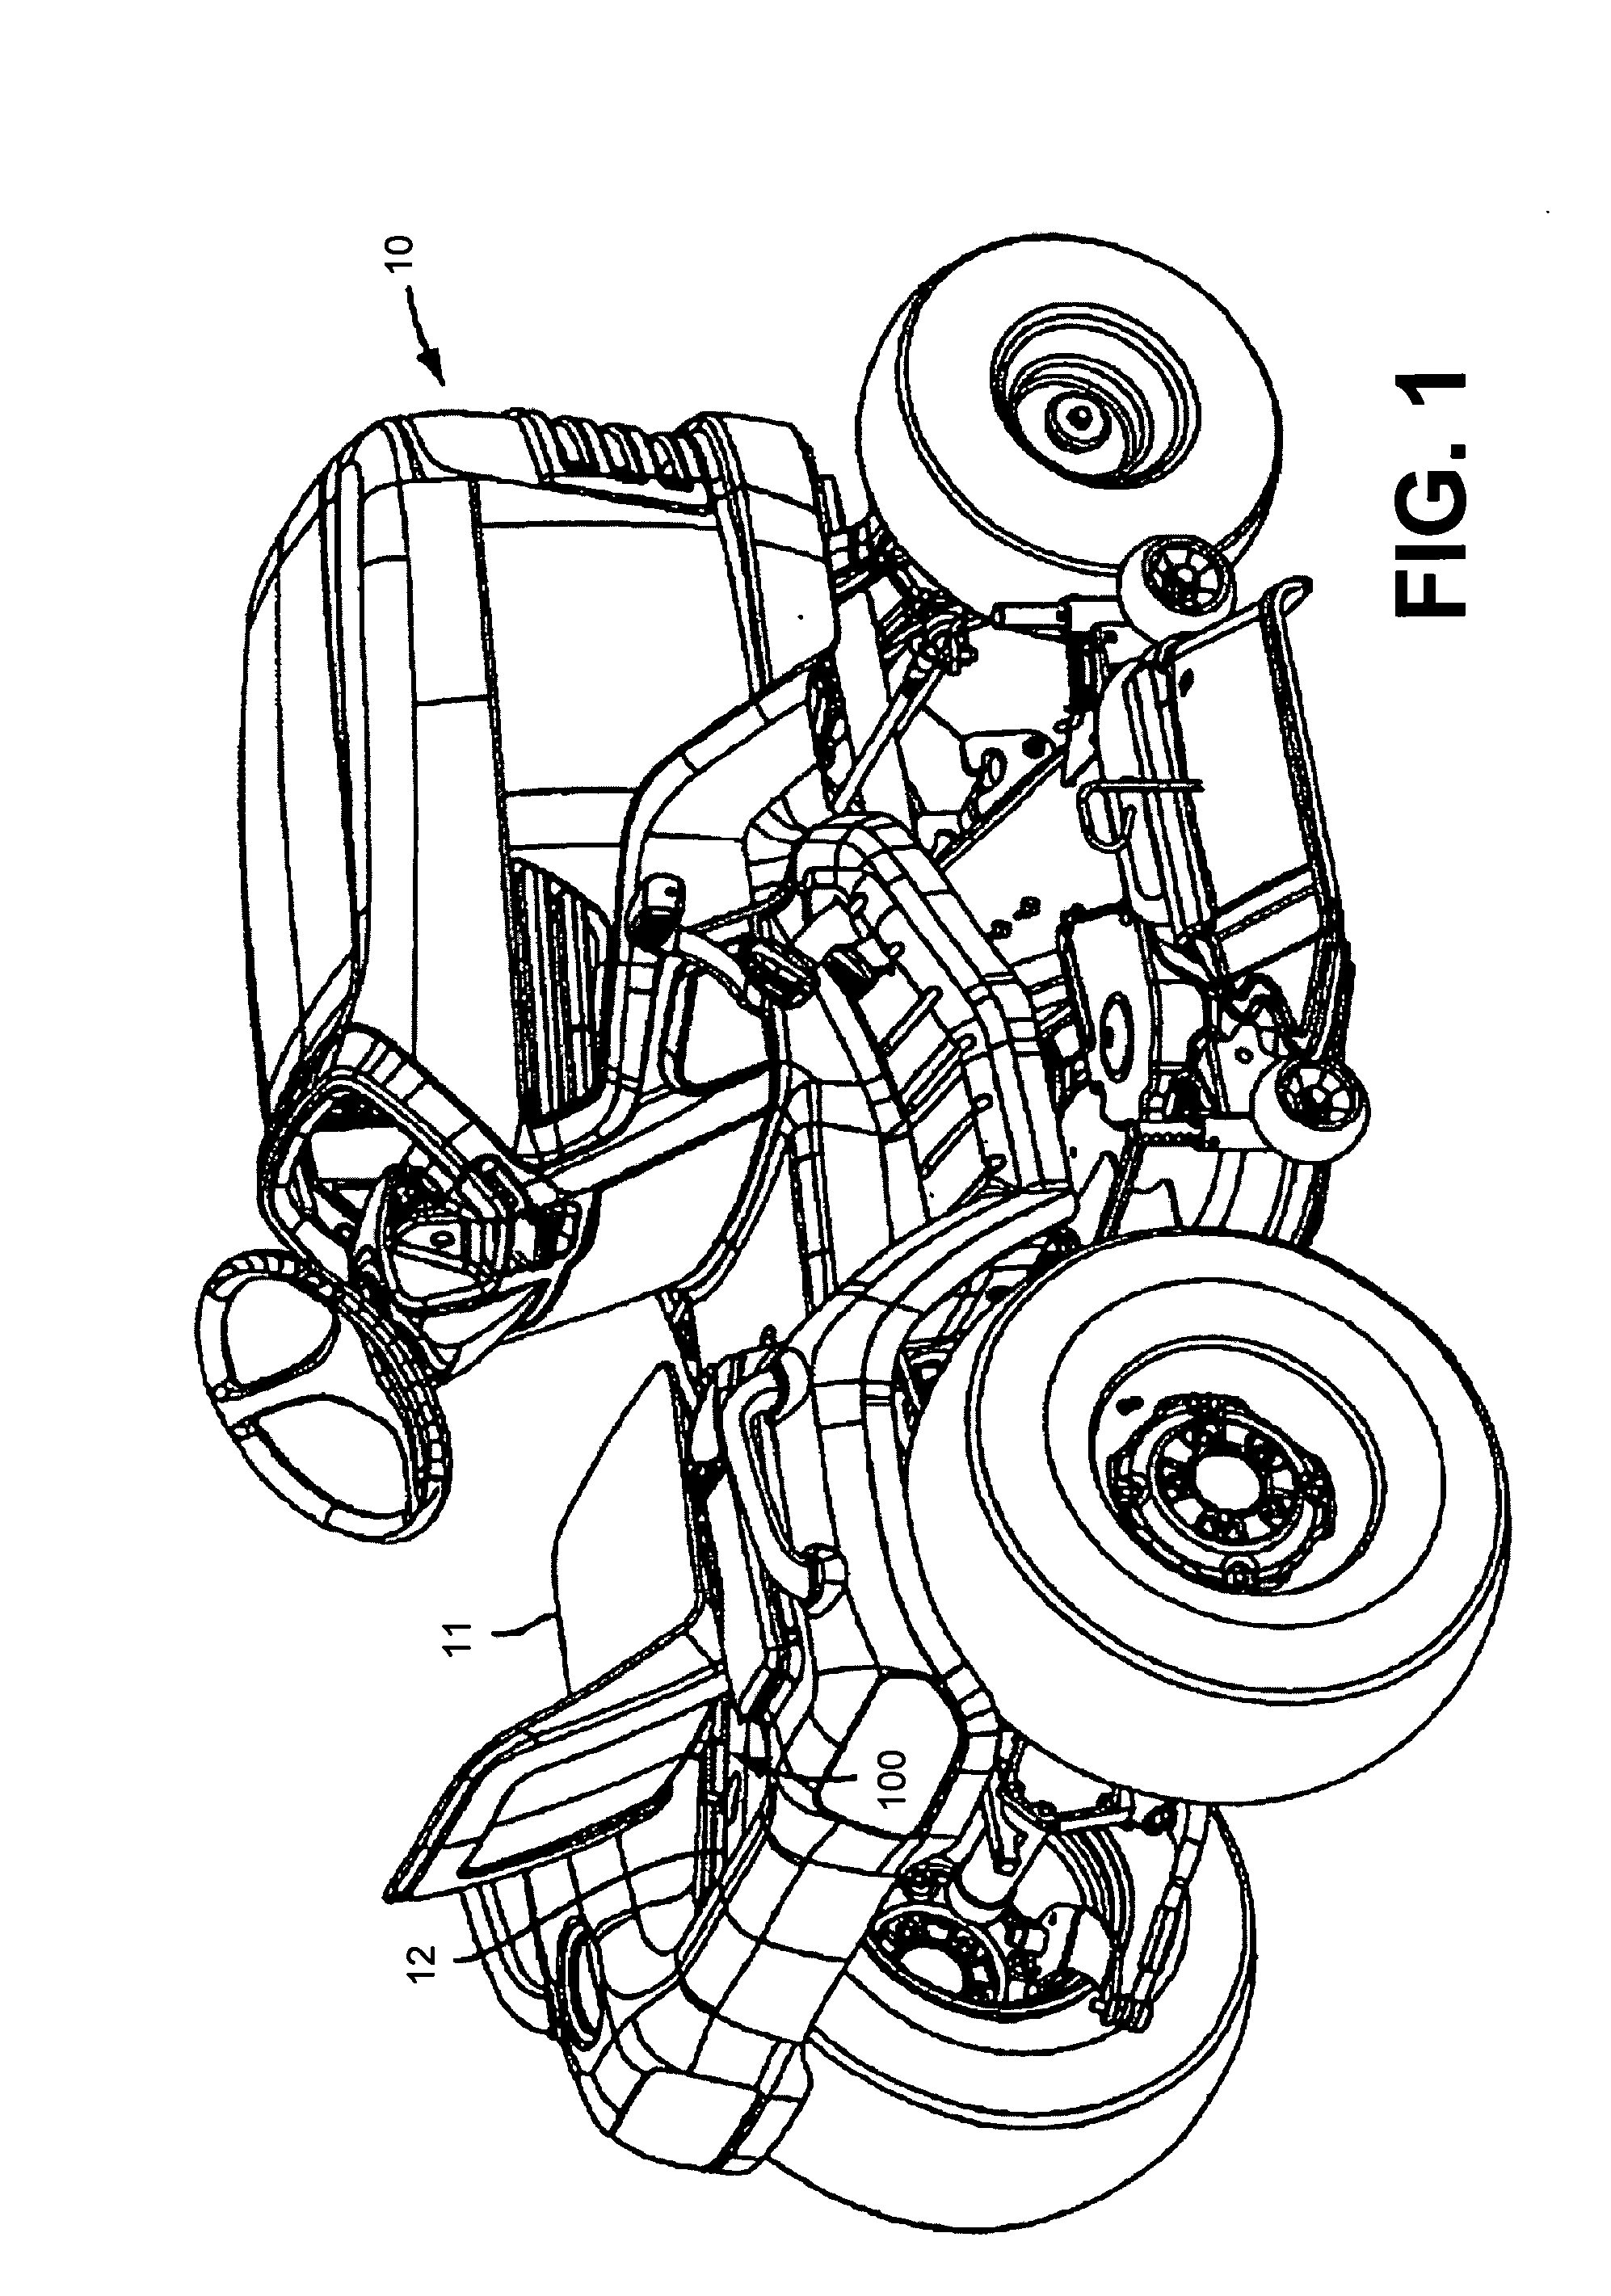 Adjustable suspension system for a seat